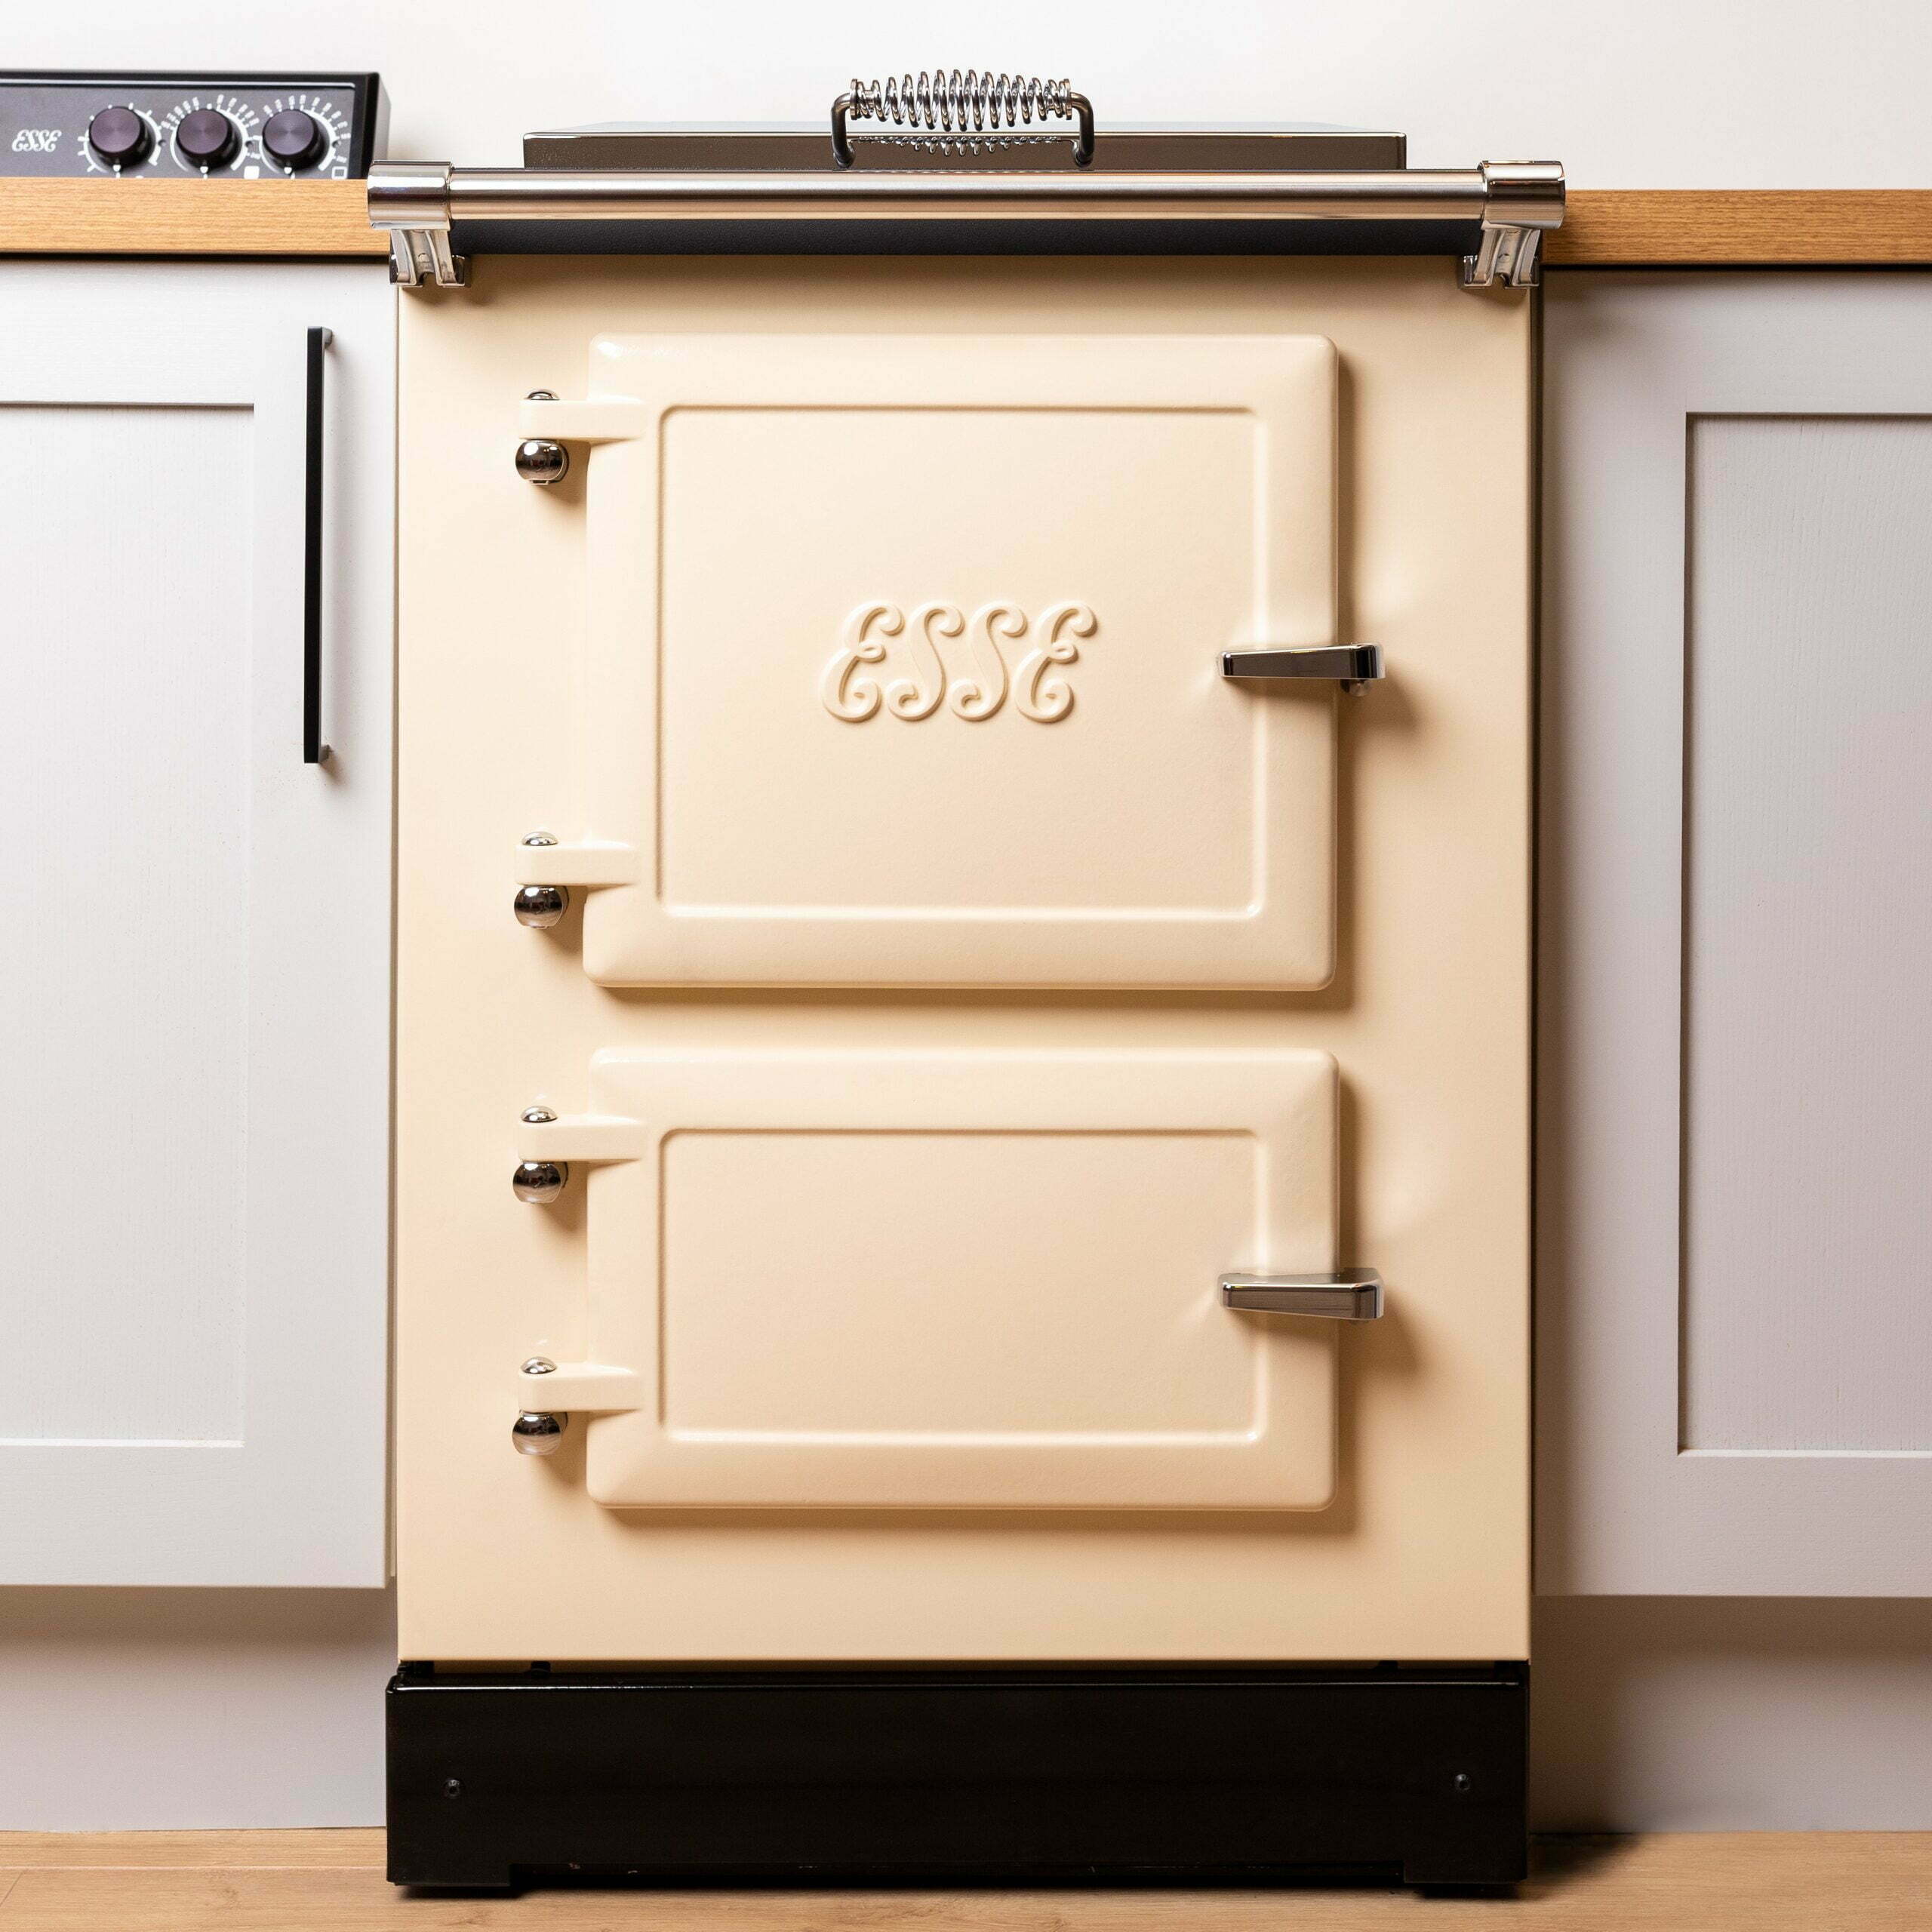 Esse Electric Cooker